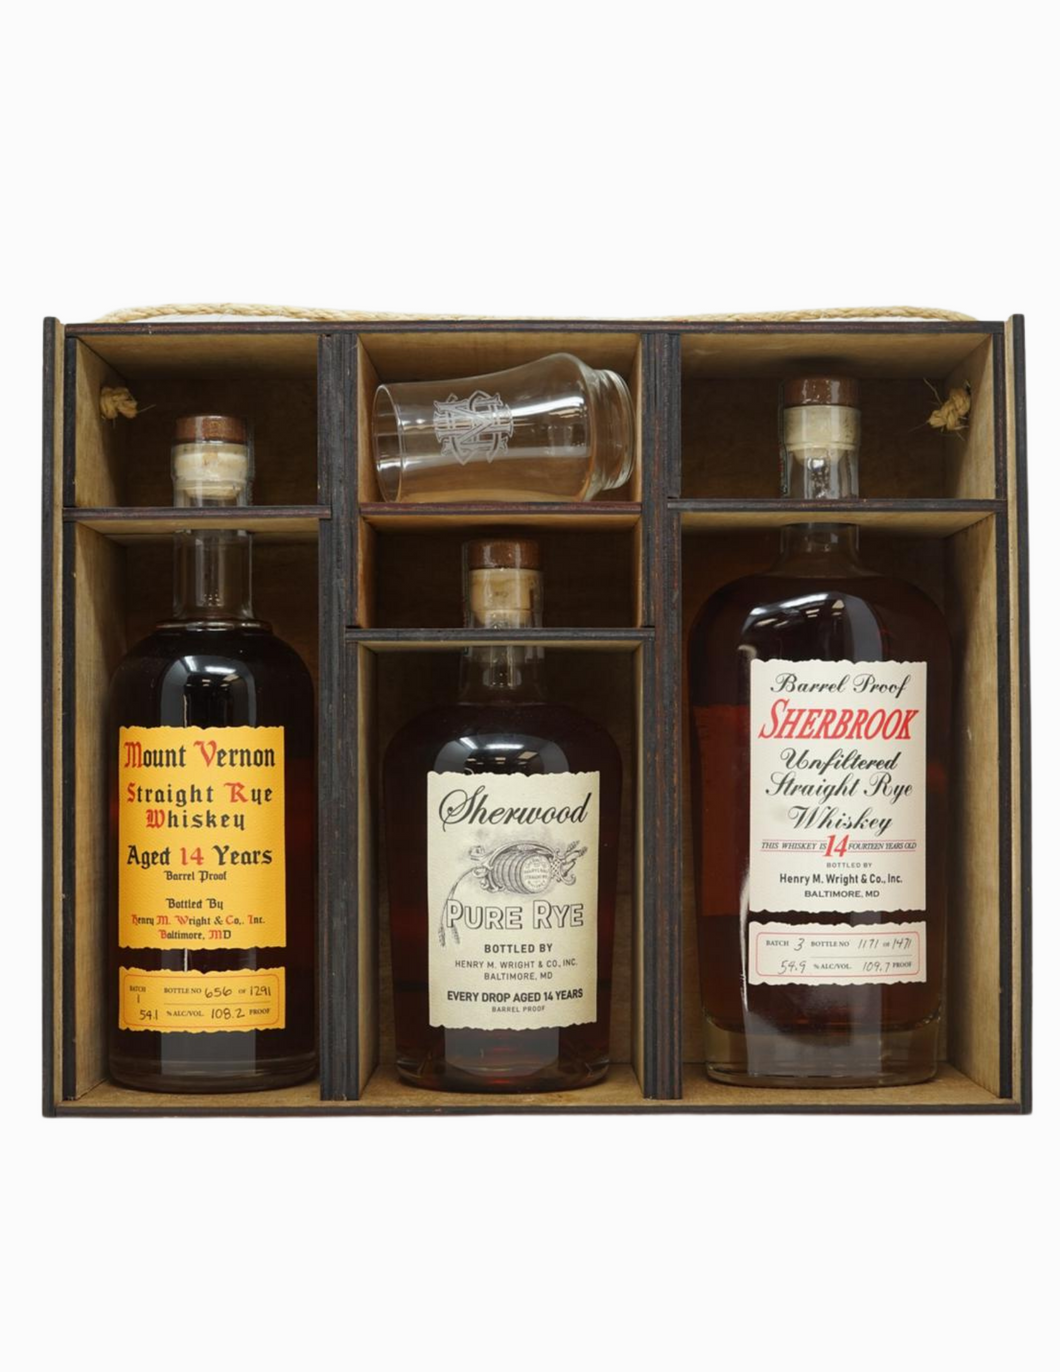 Maryland Heritage Series Collector's Box & Glass *No Bottles Included*